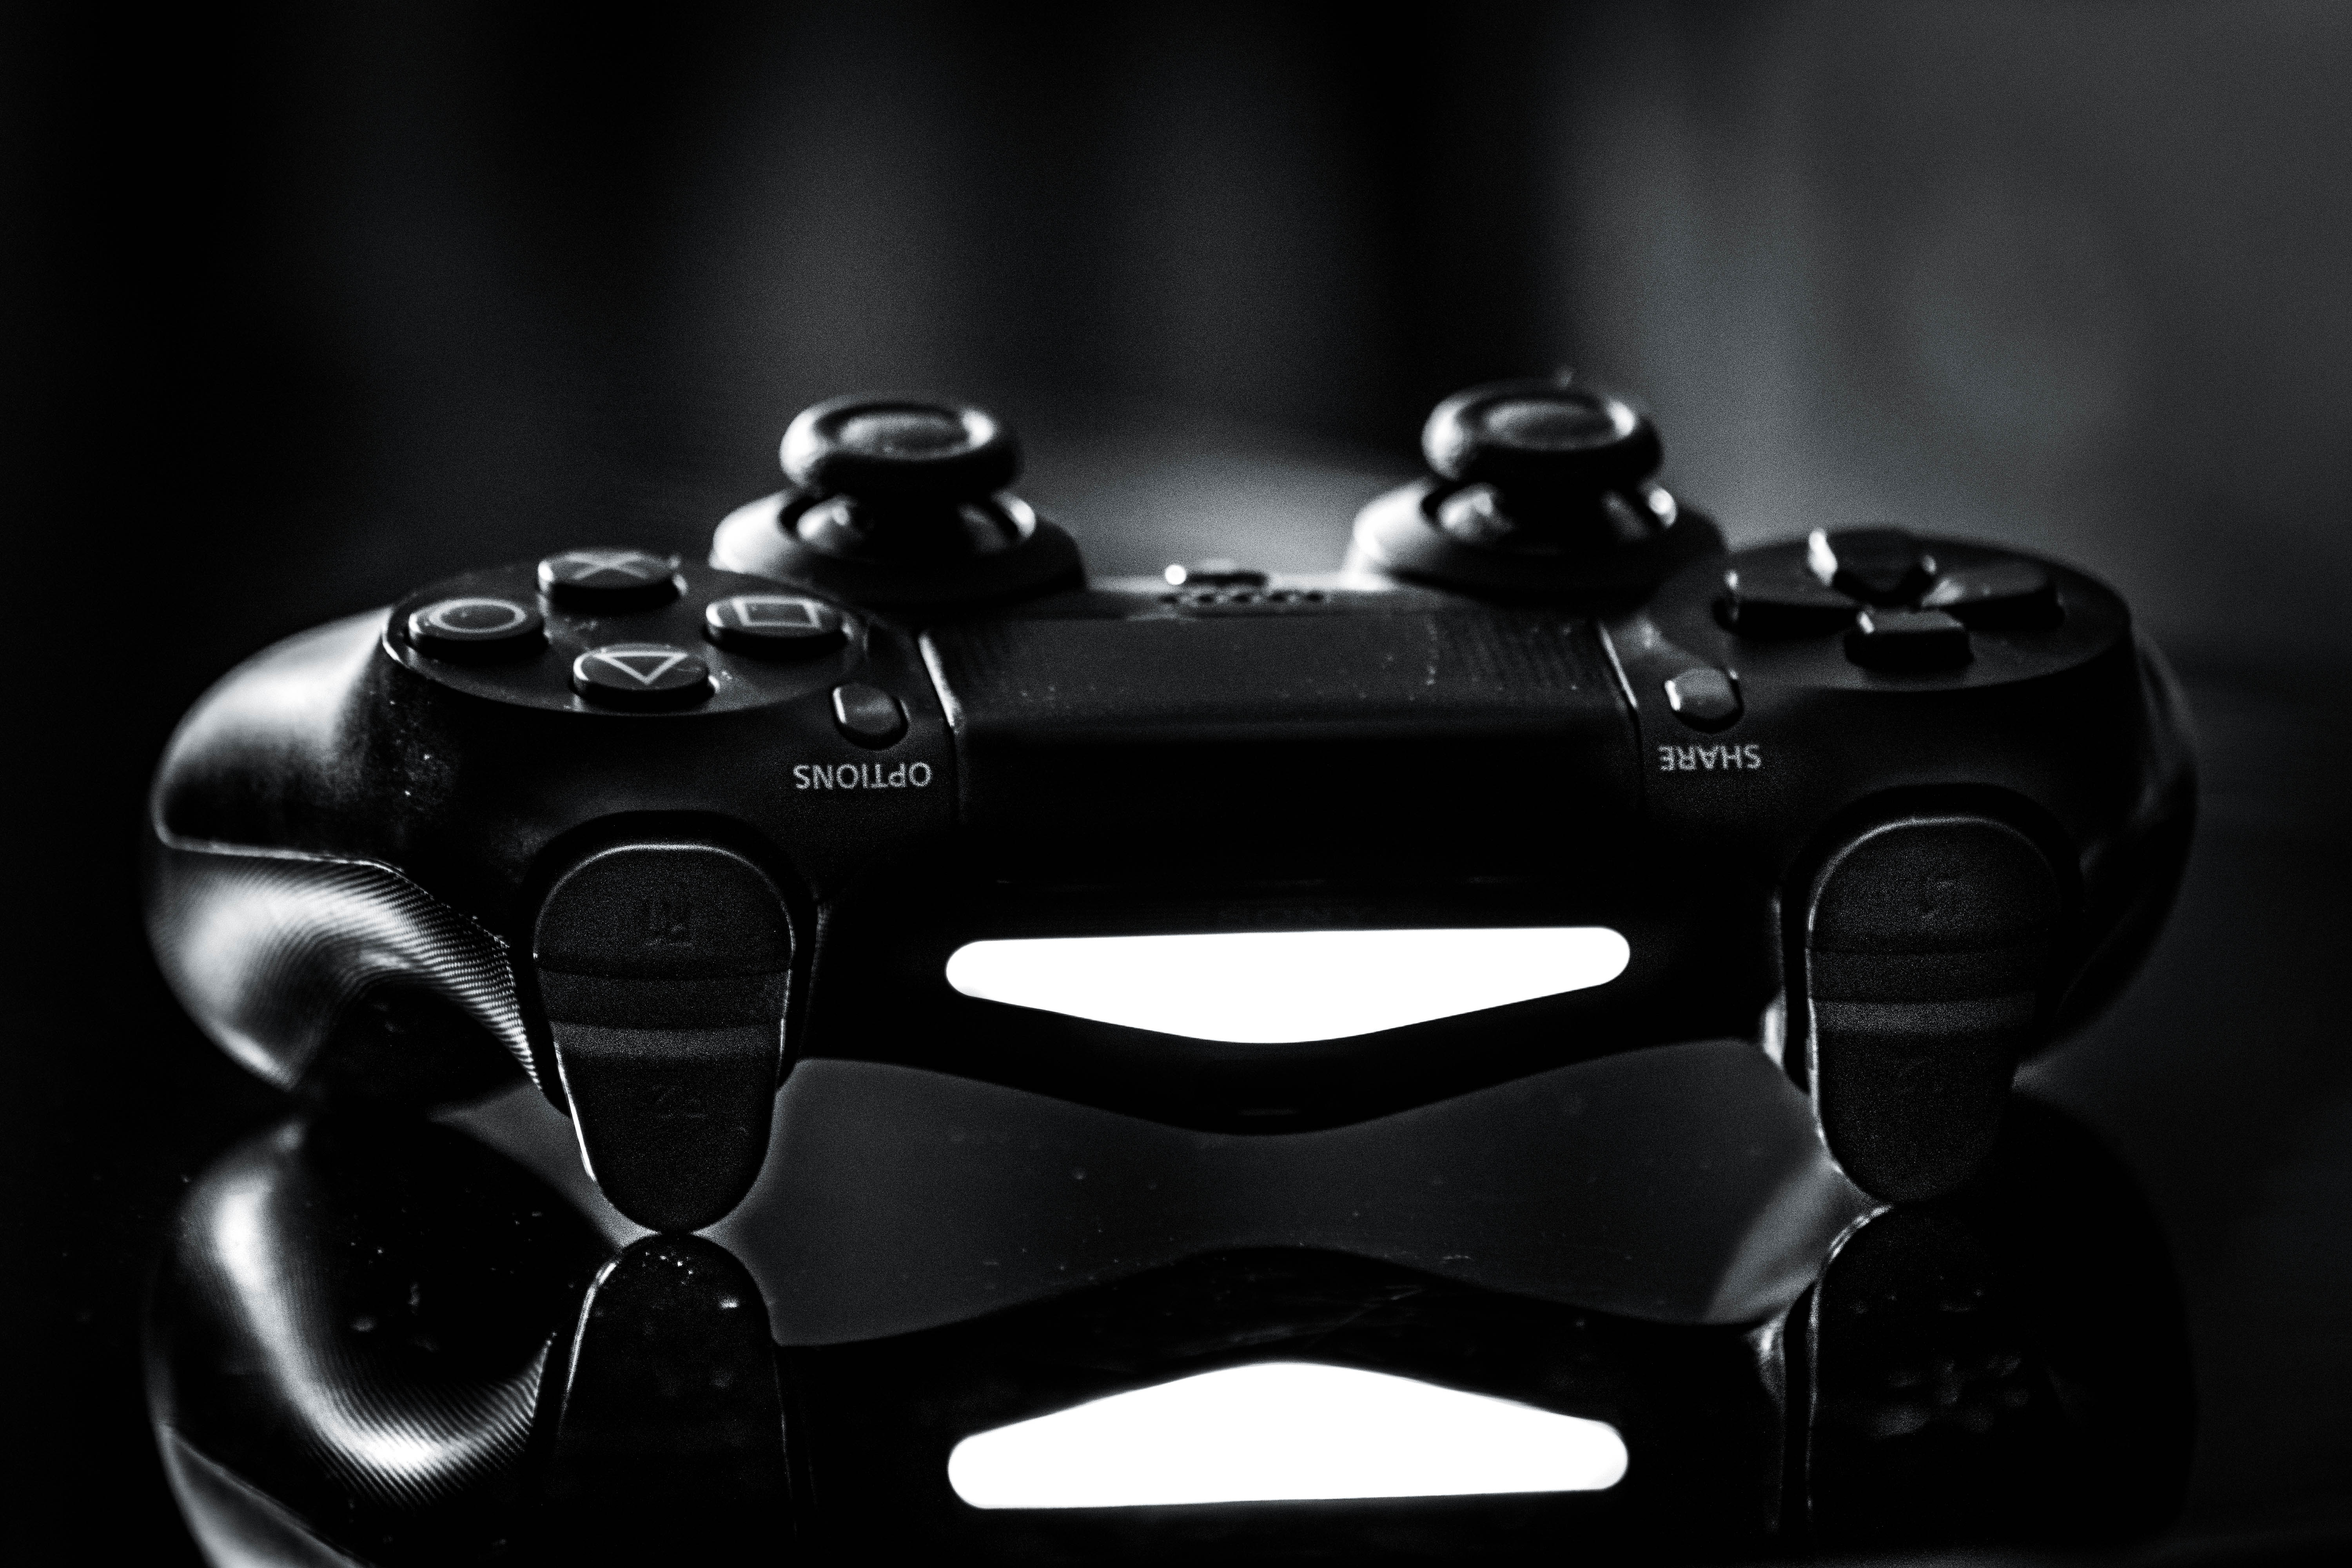 Game Gear Controller Low Saturation Monochrome PlayStation 4 DualShock 4 Wallpaper:6000x4000